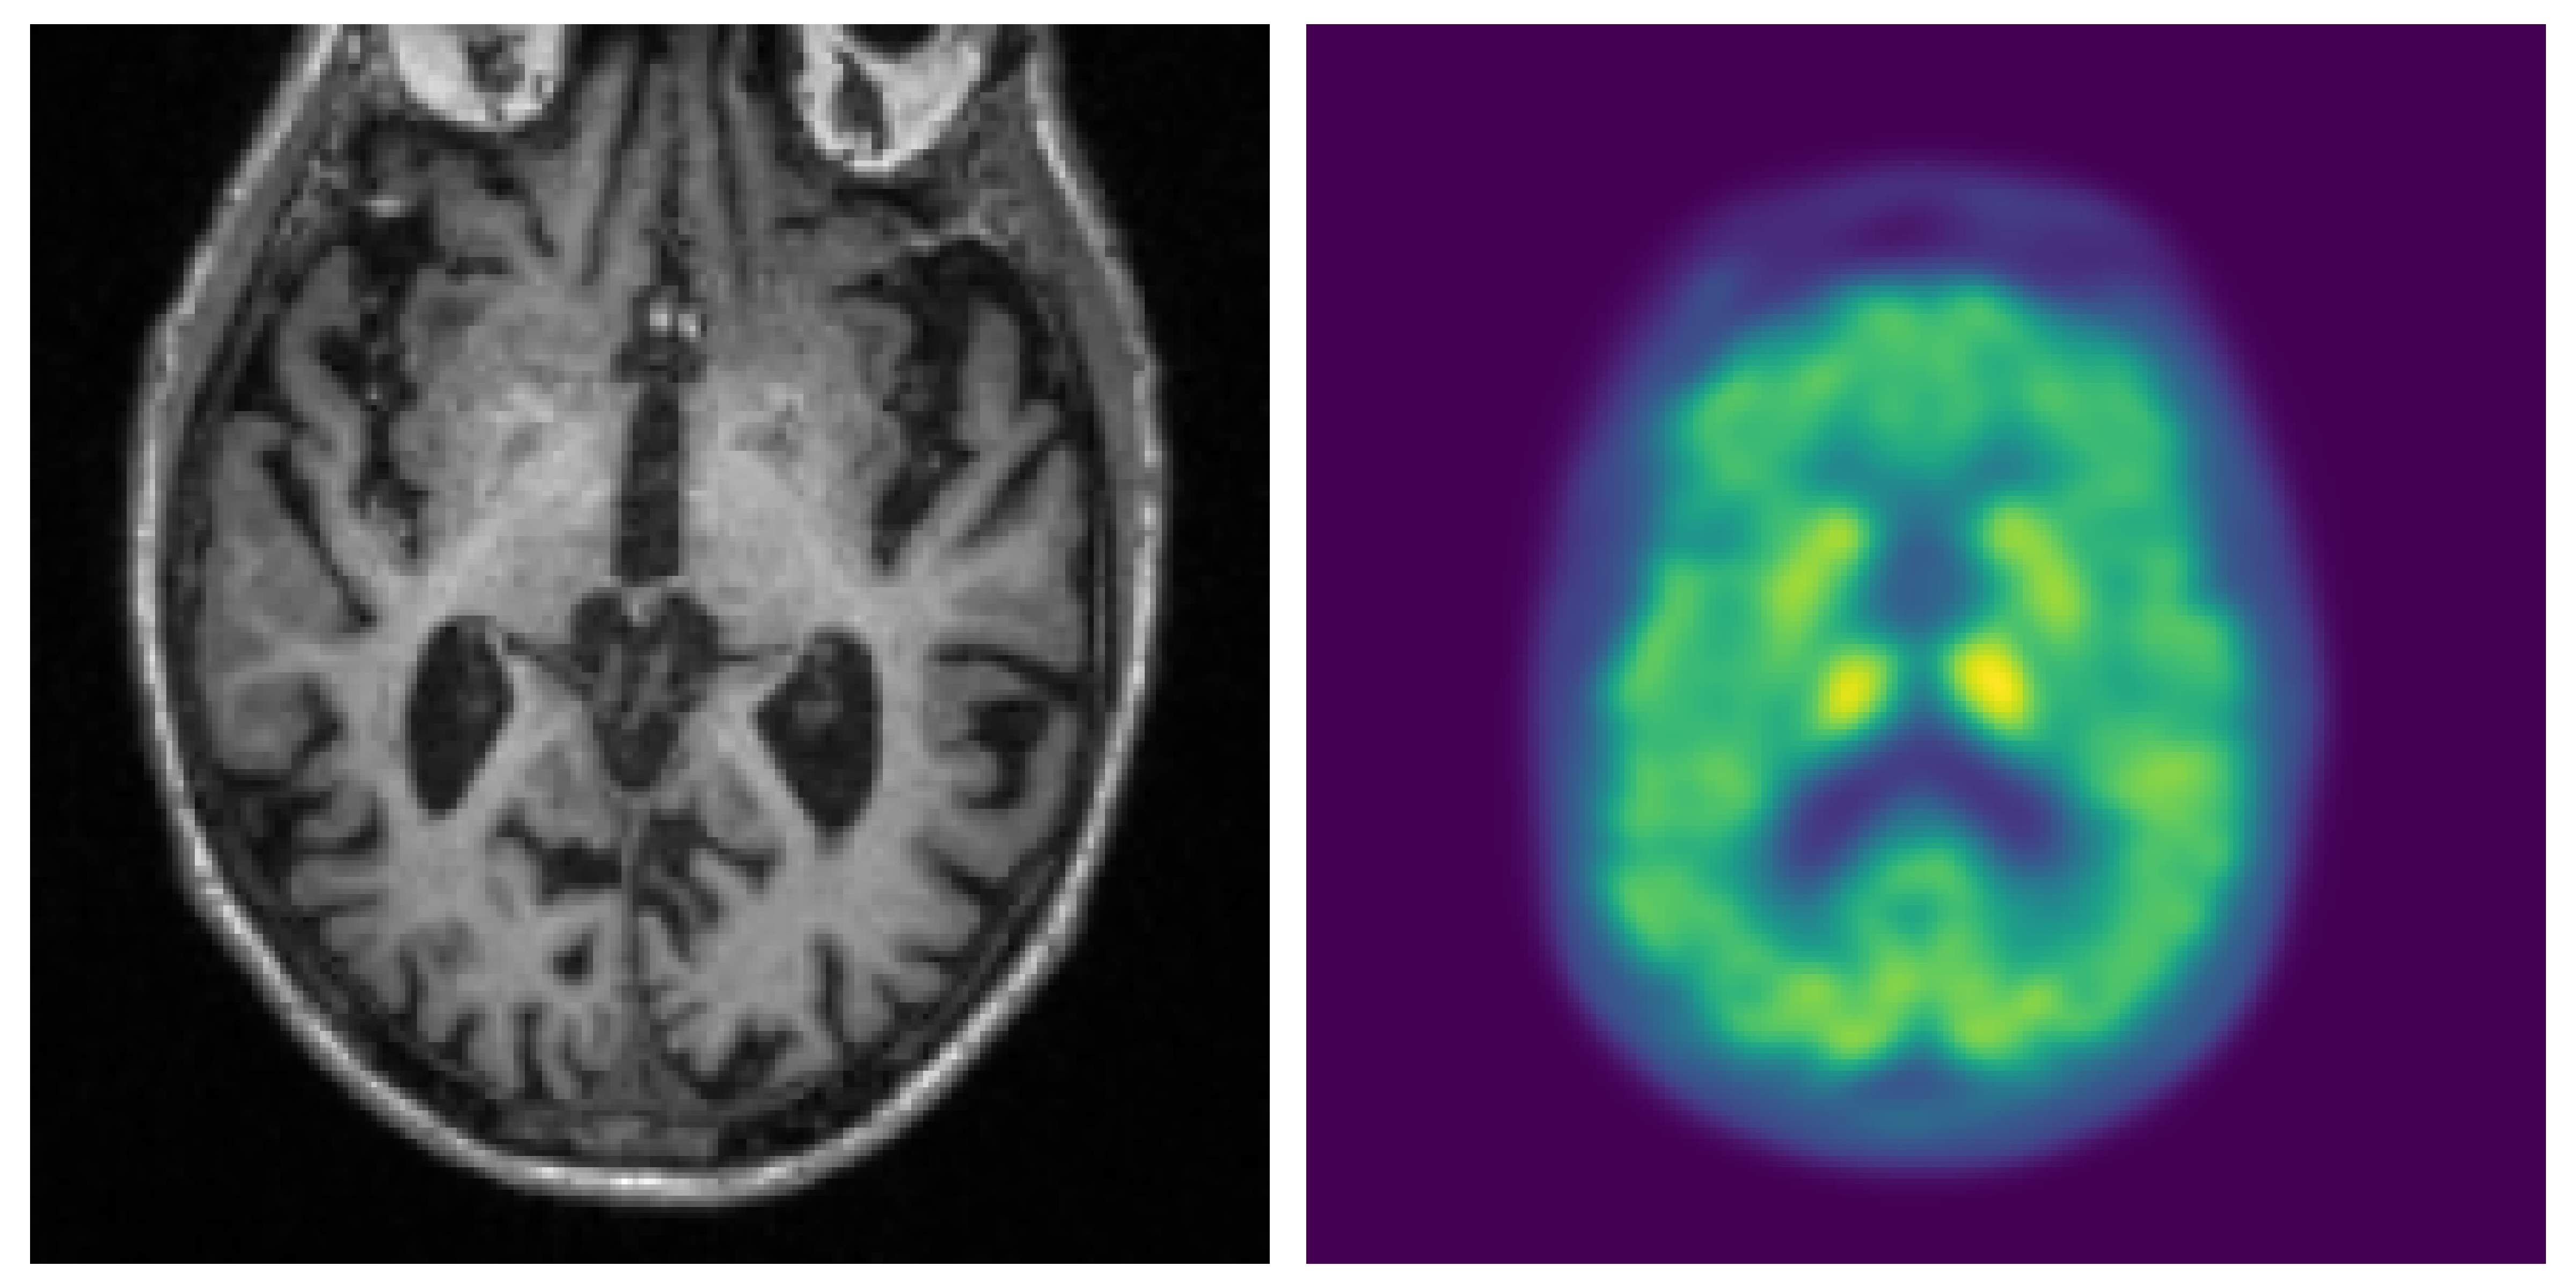 Examples of MRI and PET scans